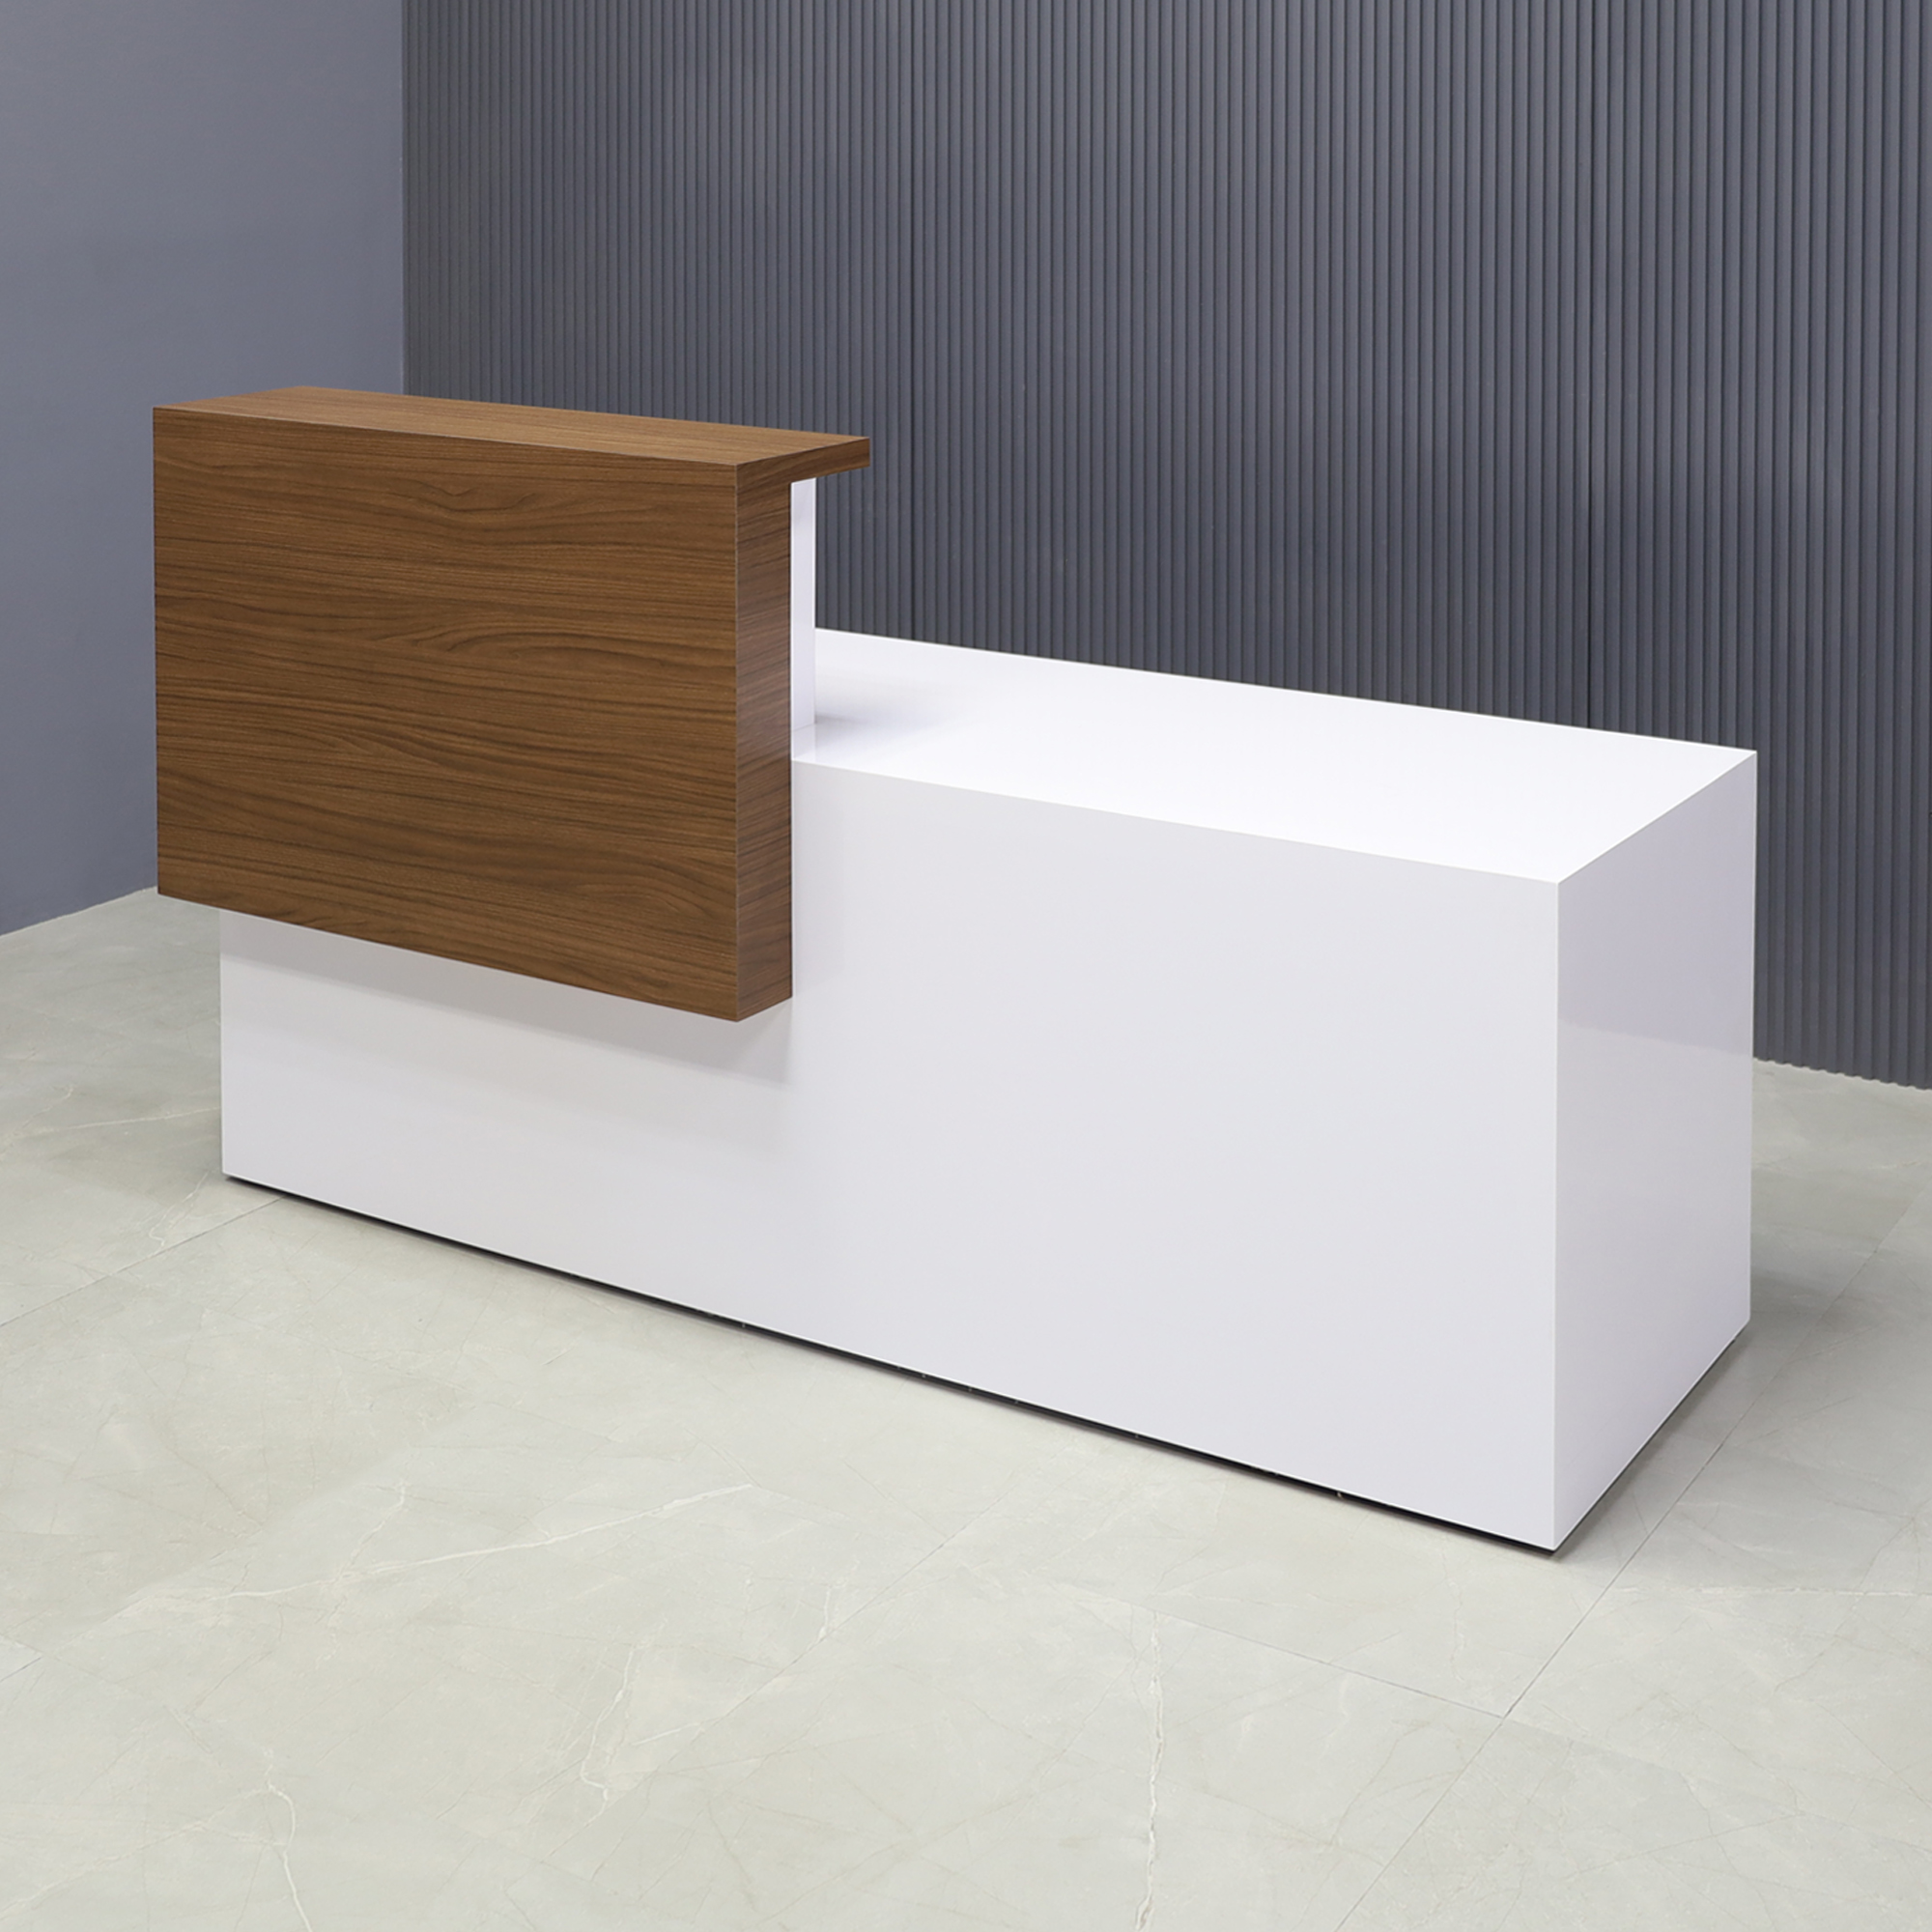 72-inch Los Angeles ADA Compliant Custom Reception Desk, left side when facing front in walnut heights matte laminate counter and white matte laminate desk, no LED, shown here.